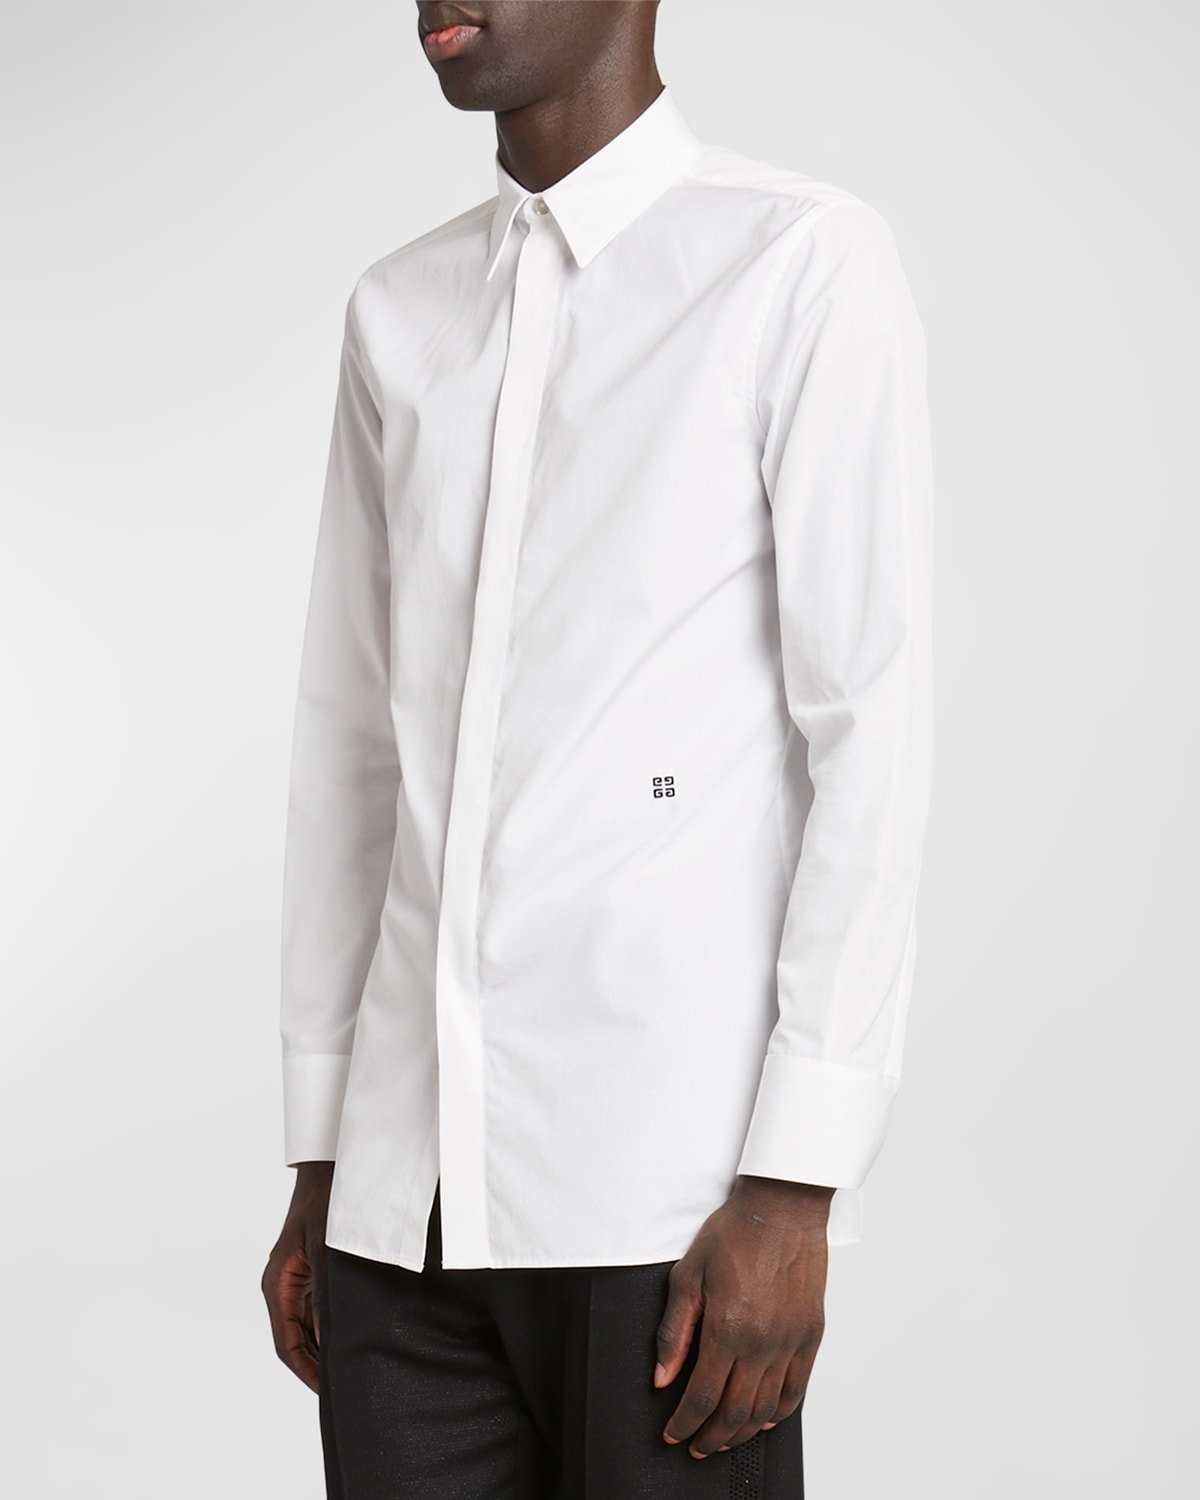 Givenchy Men's Basic Dress Shirt With Mini 4g Embroidery In White/black